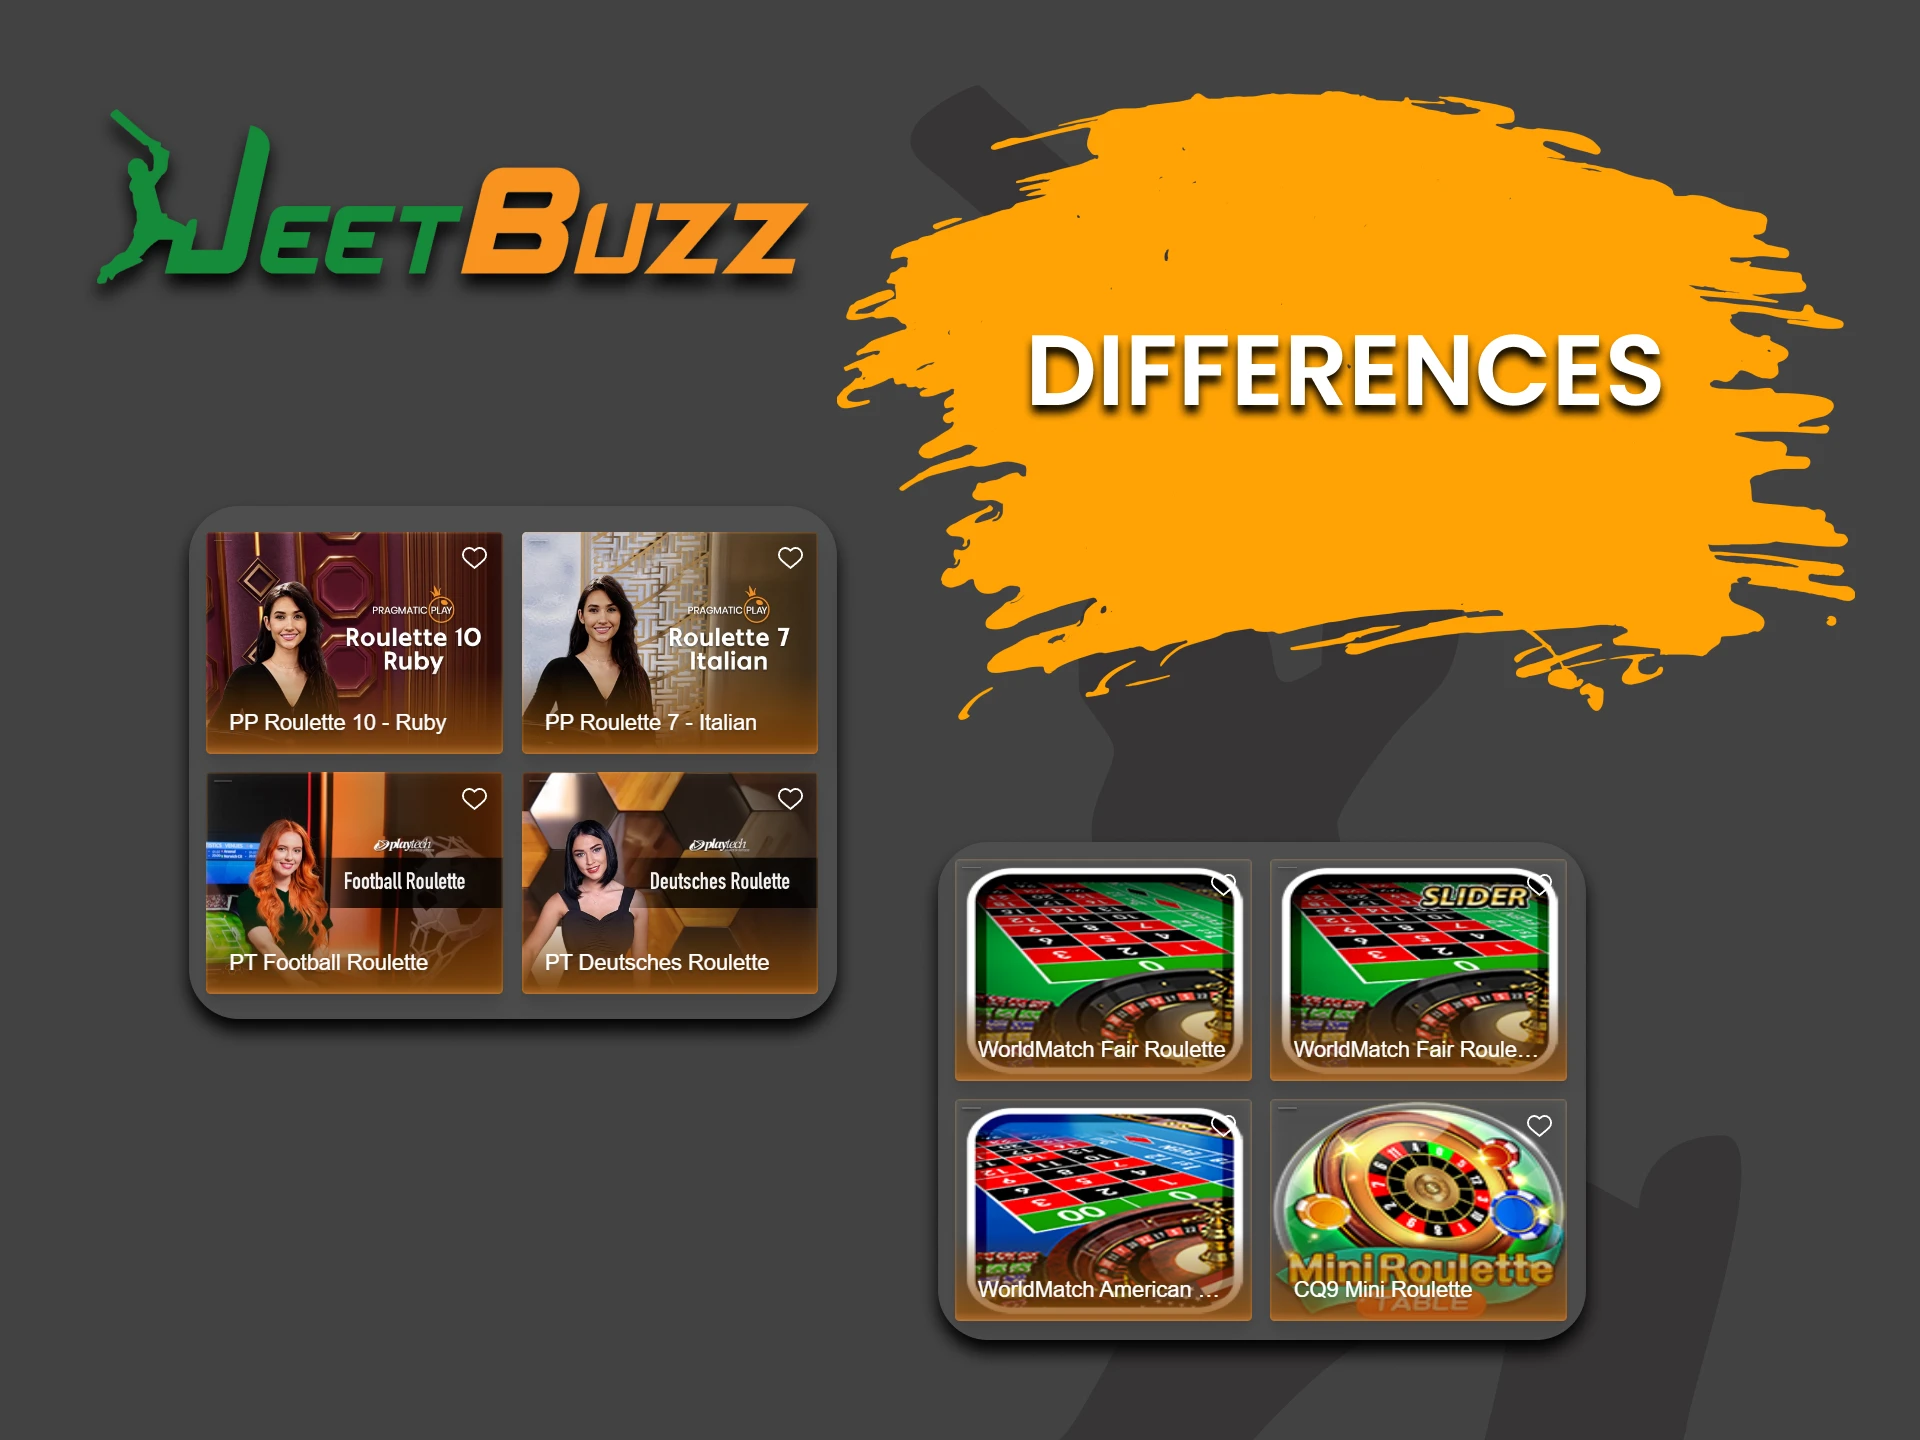 Find out the difference between a casino and a live casino on JeetBuzz.